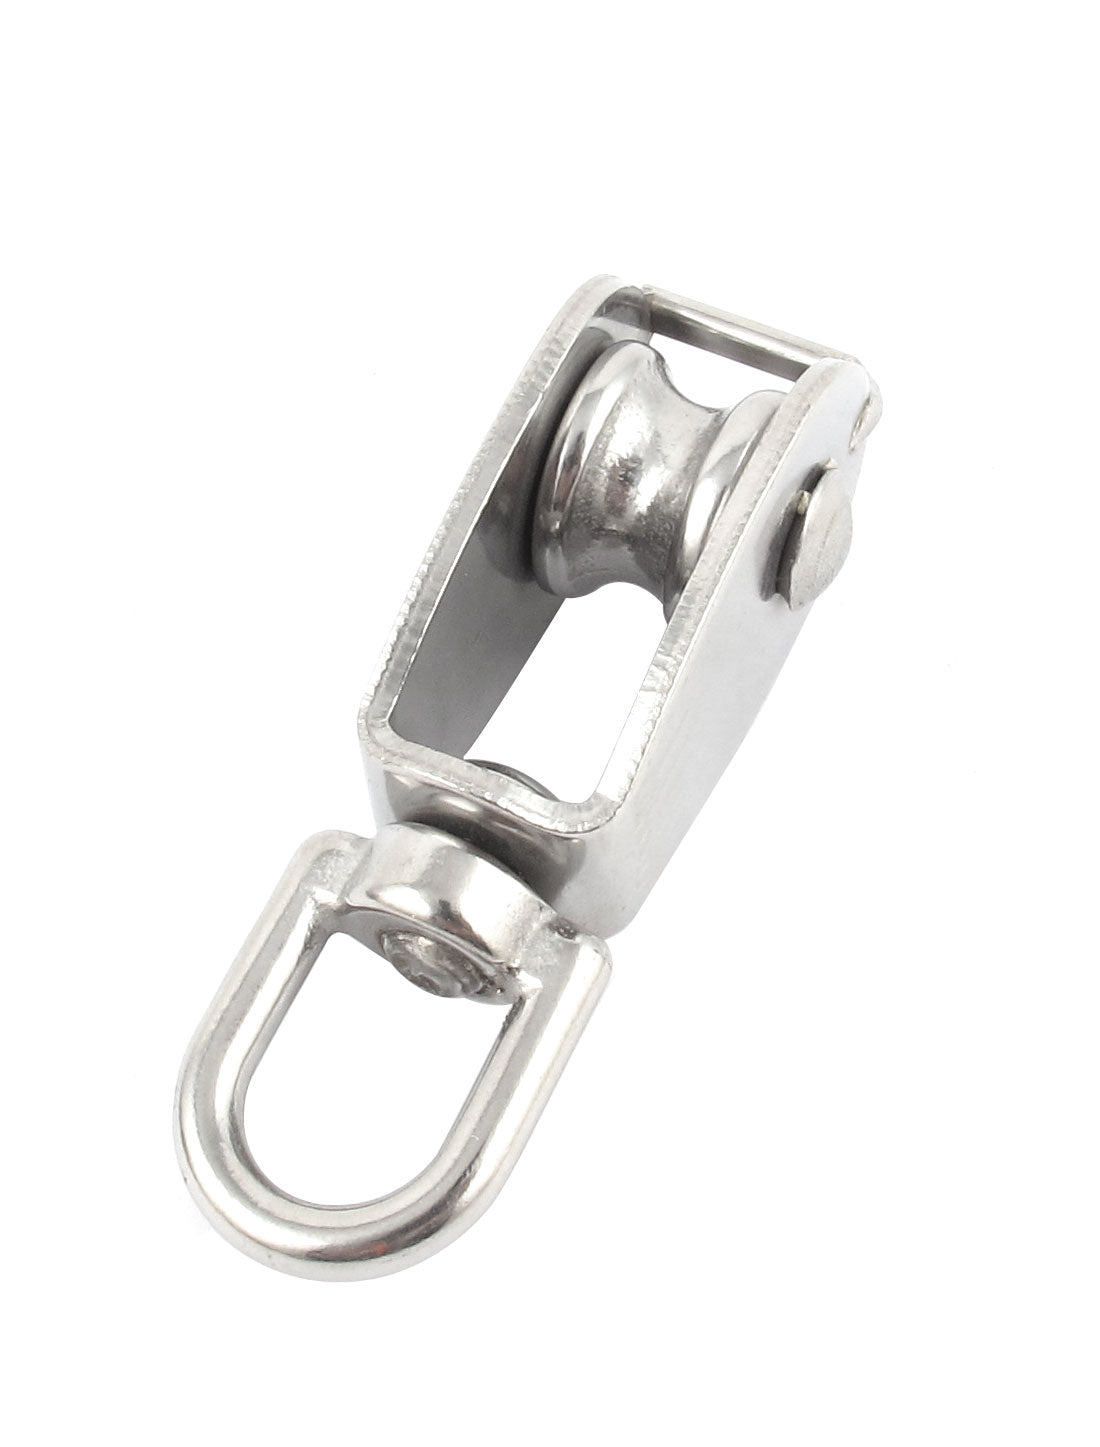 uxcell Uxcell 15mm Silver Tone Stainless Steel Single Sheave Swivel Eye Wire Rope Pulley 0.035 Ton